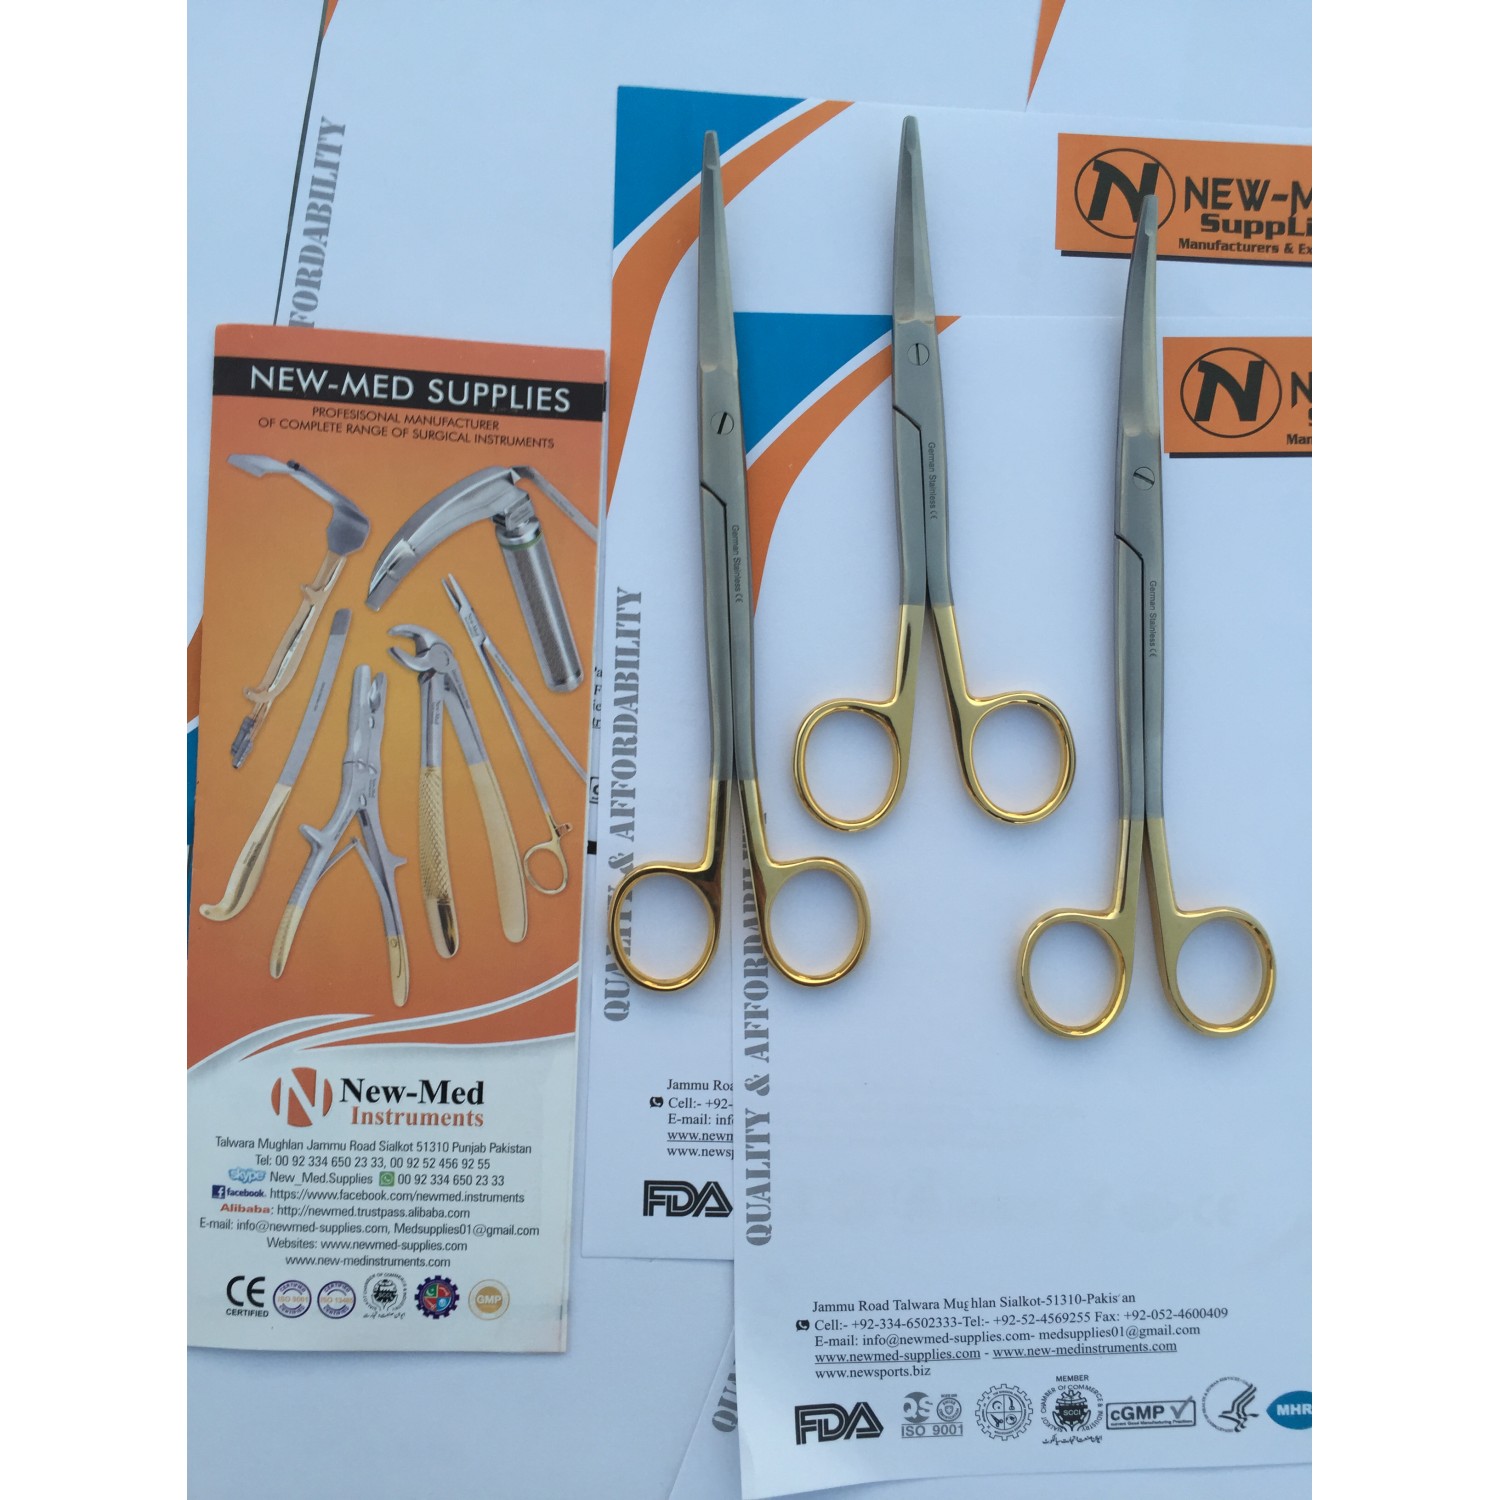 https://new-medinstruments.com/image/cache/catalog/Category%20Pictures/BBB/008-1500x1500.jpg